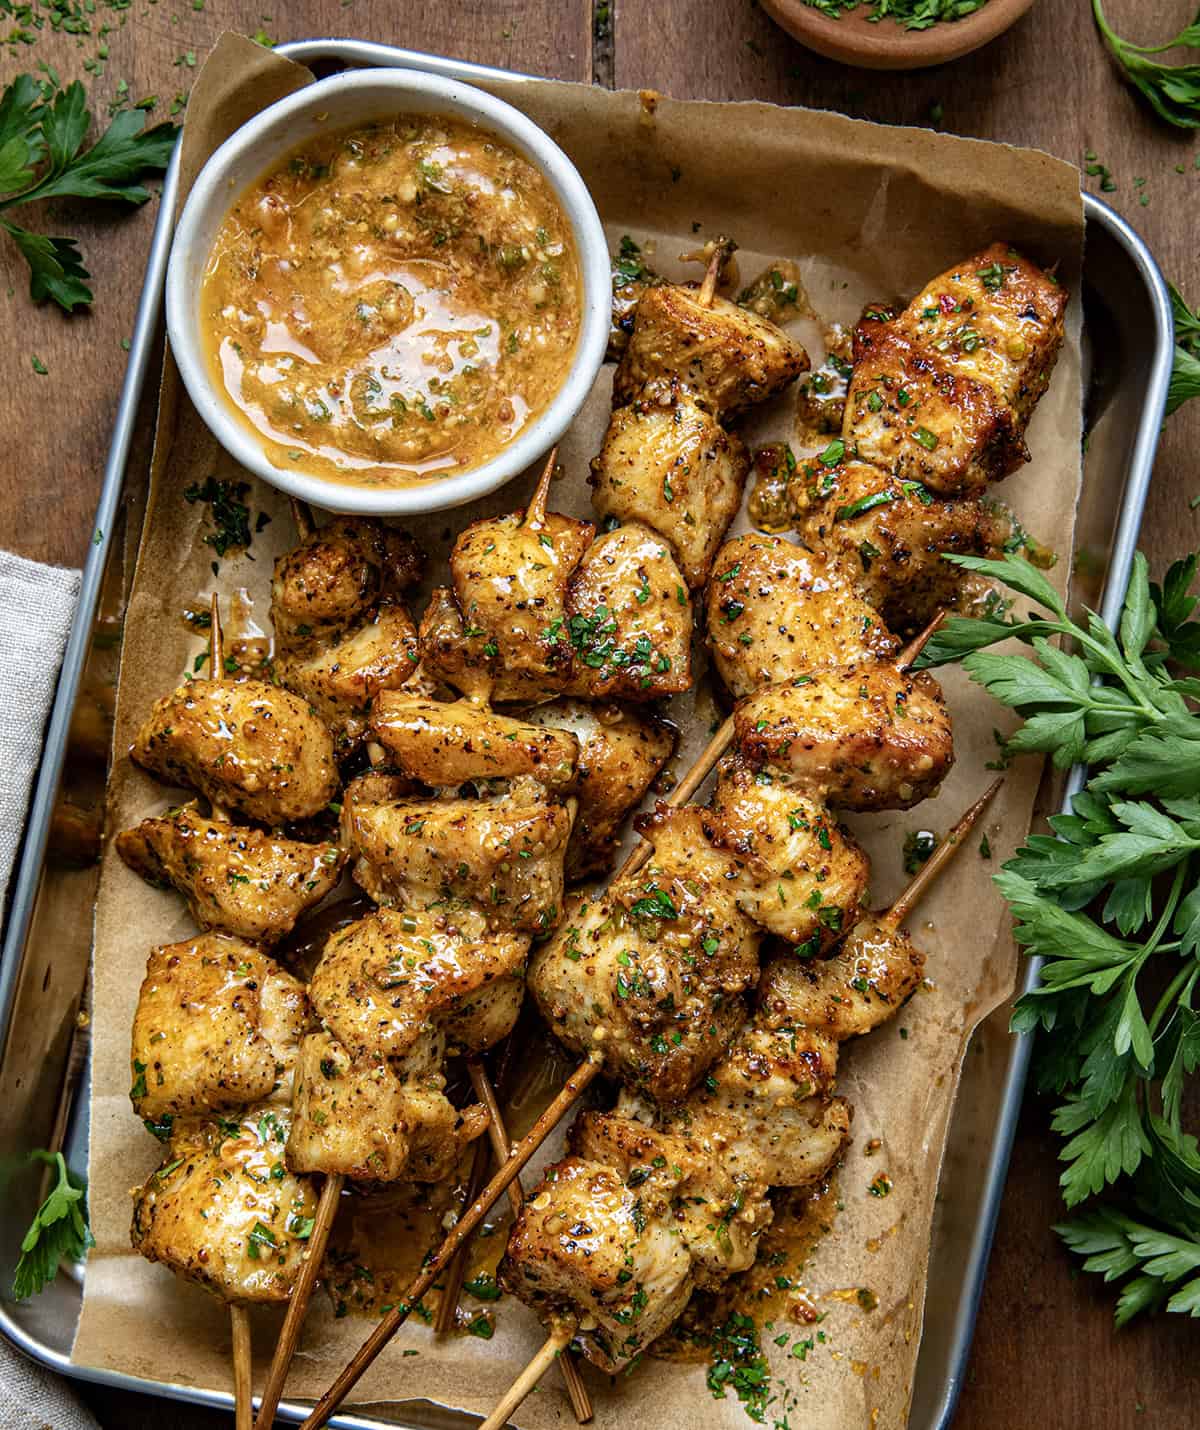 Platter of Cowboy Butter Chicken Skewers next to Cowboy Butter on a wooden table from overhead.